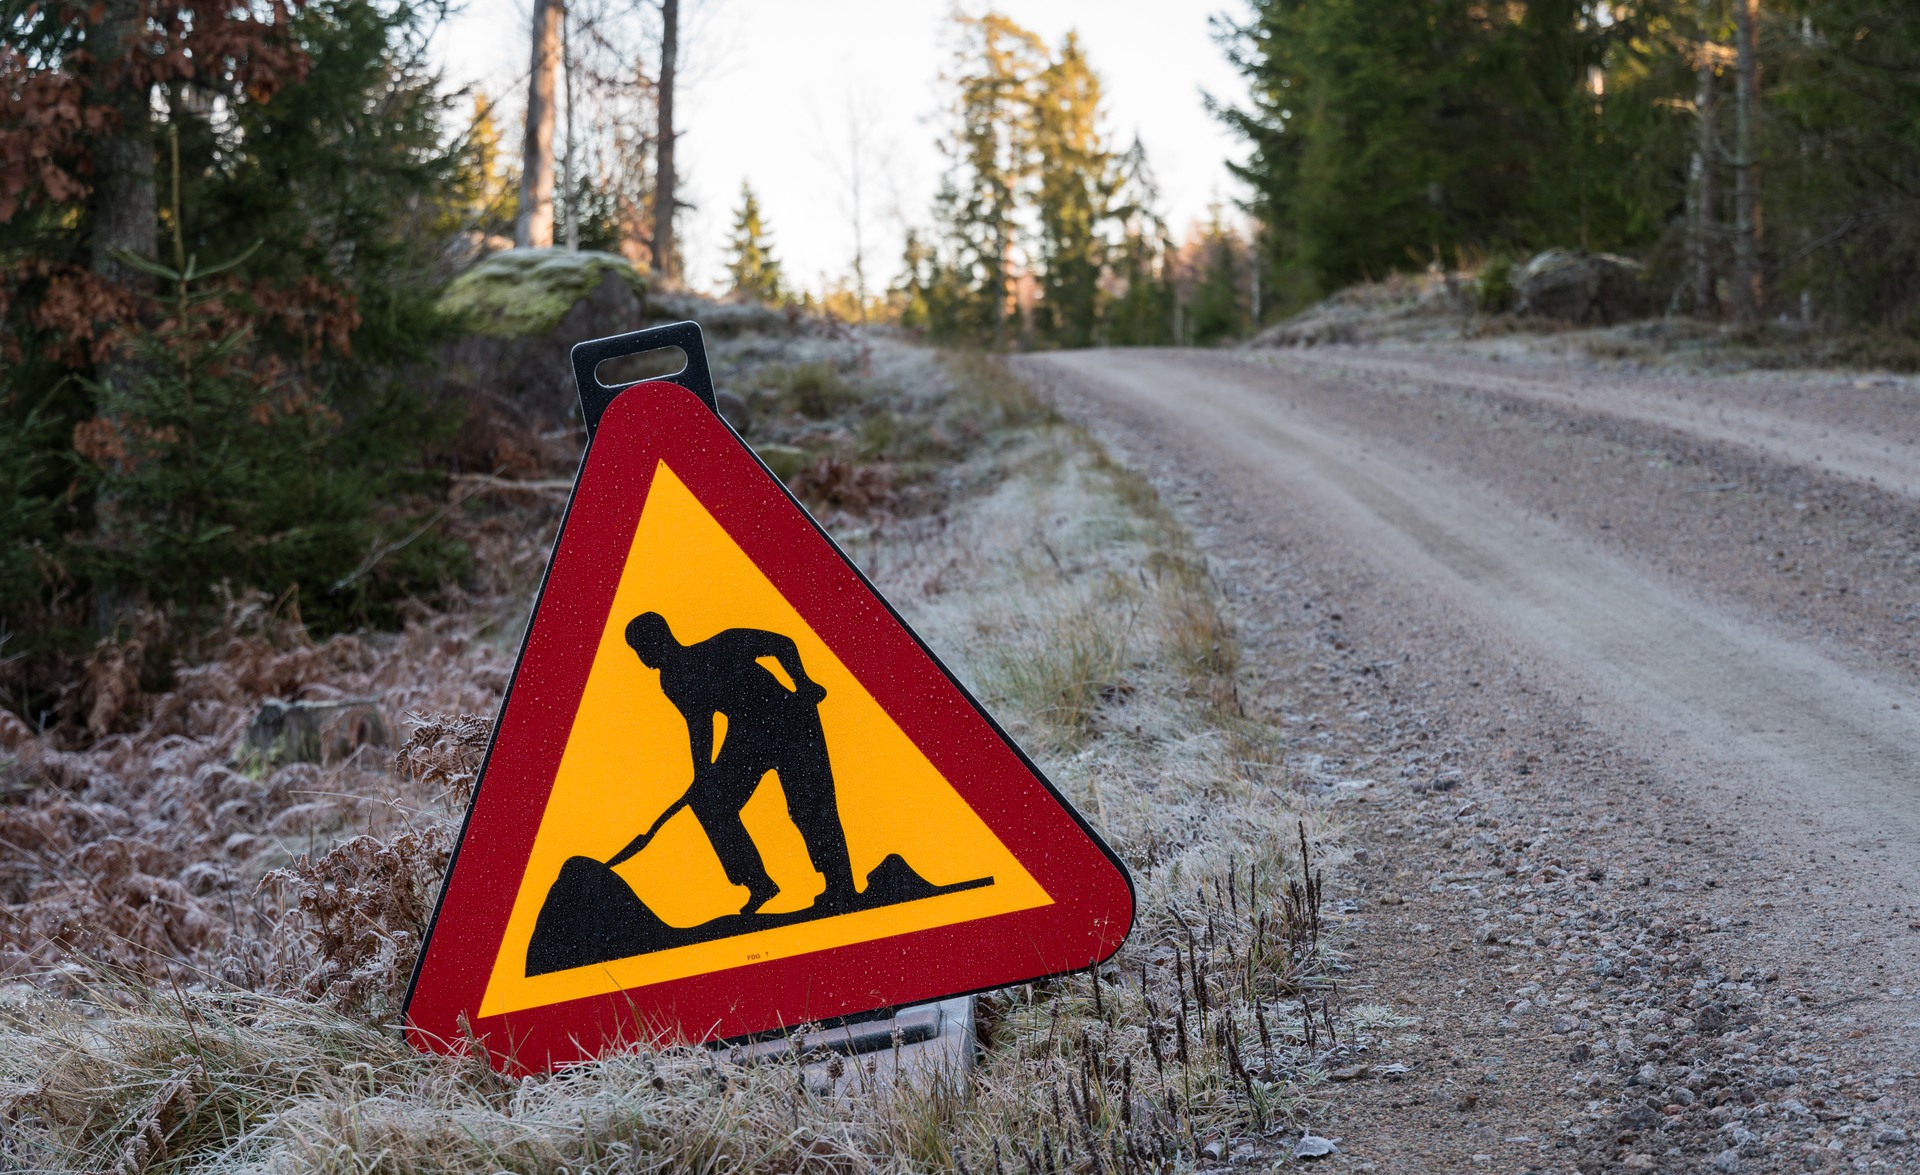 Traffic sign with warning for road work by a gravel road side in a forest